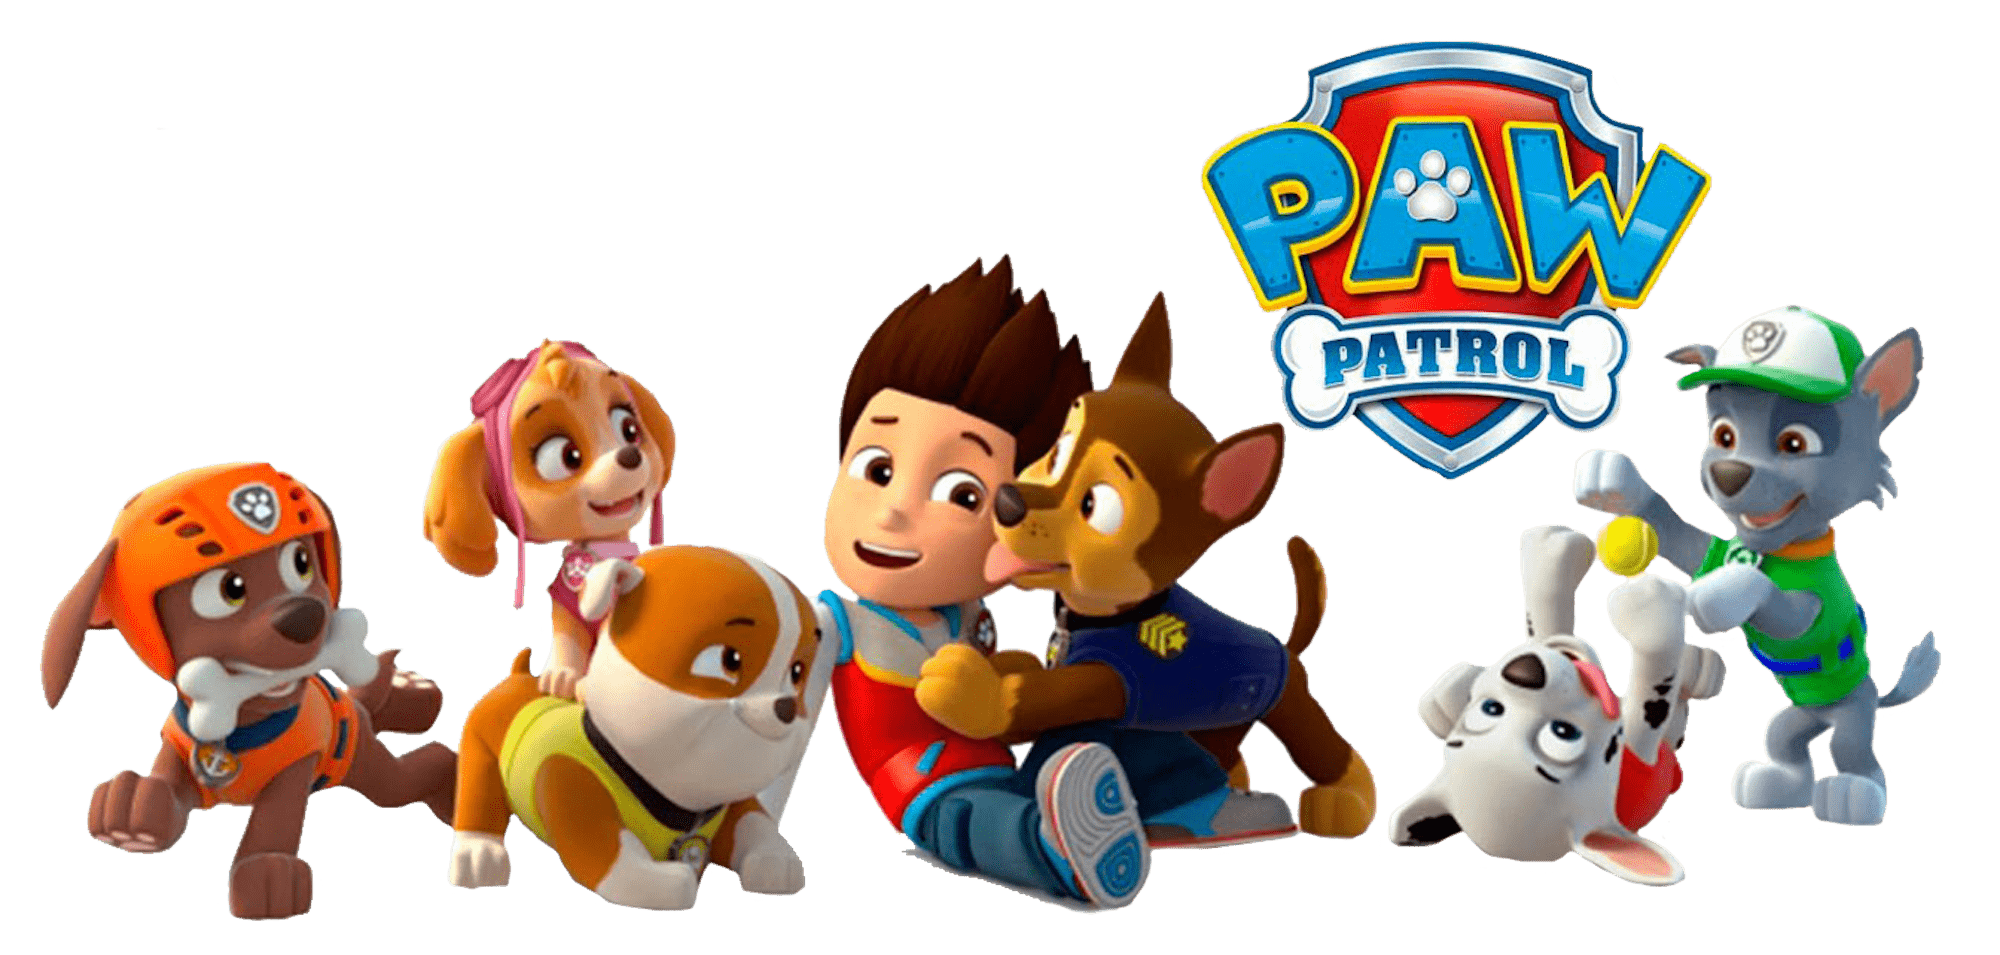 1495729253ryder-with-chase-paw-patrol-clipart-png